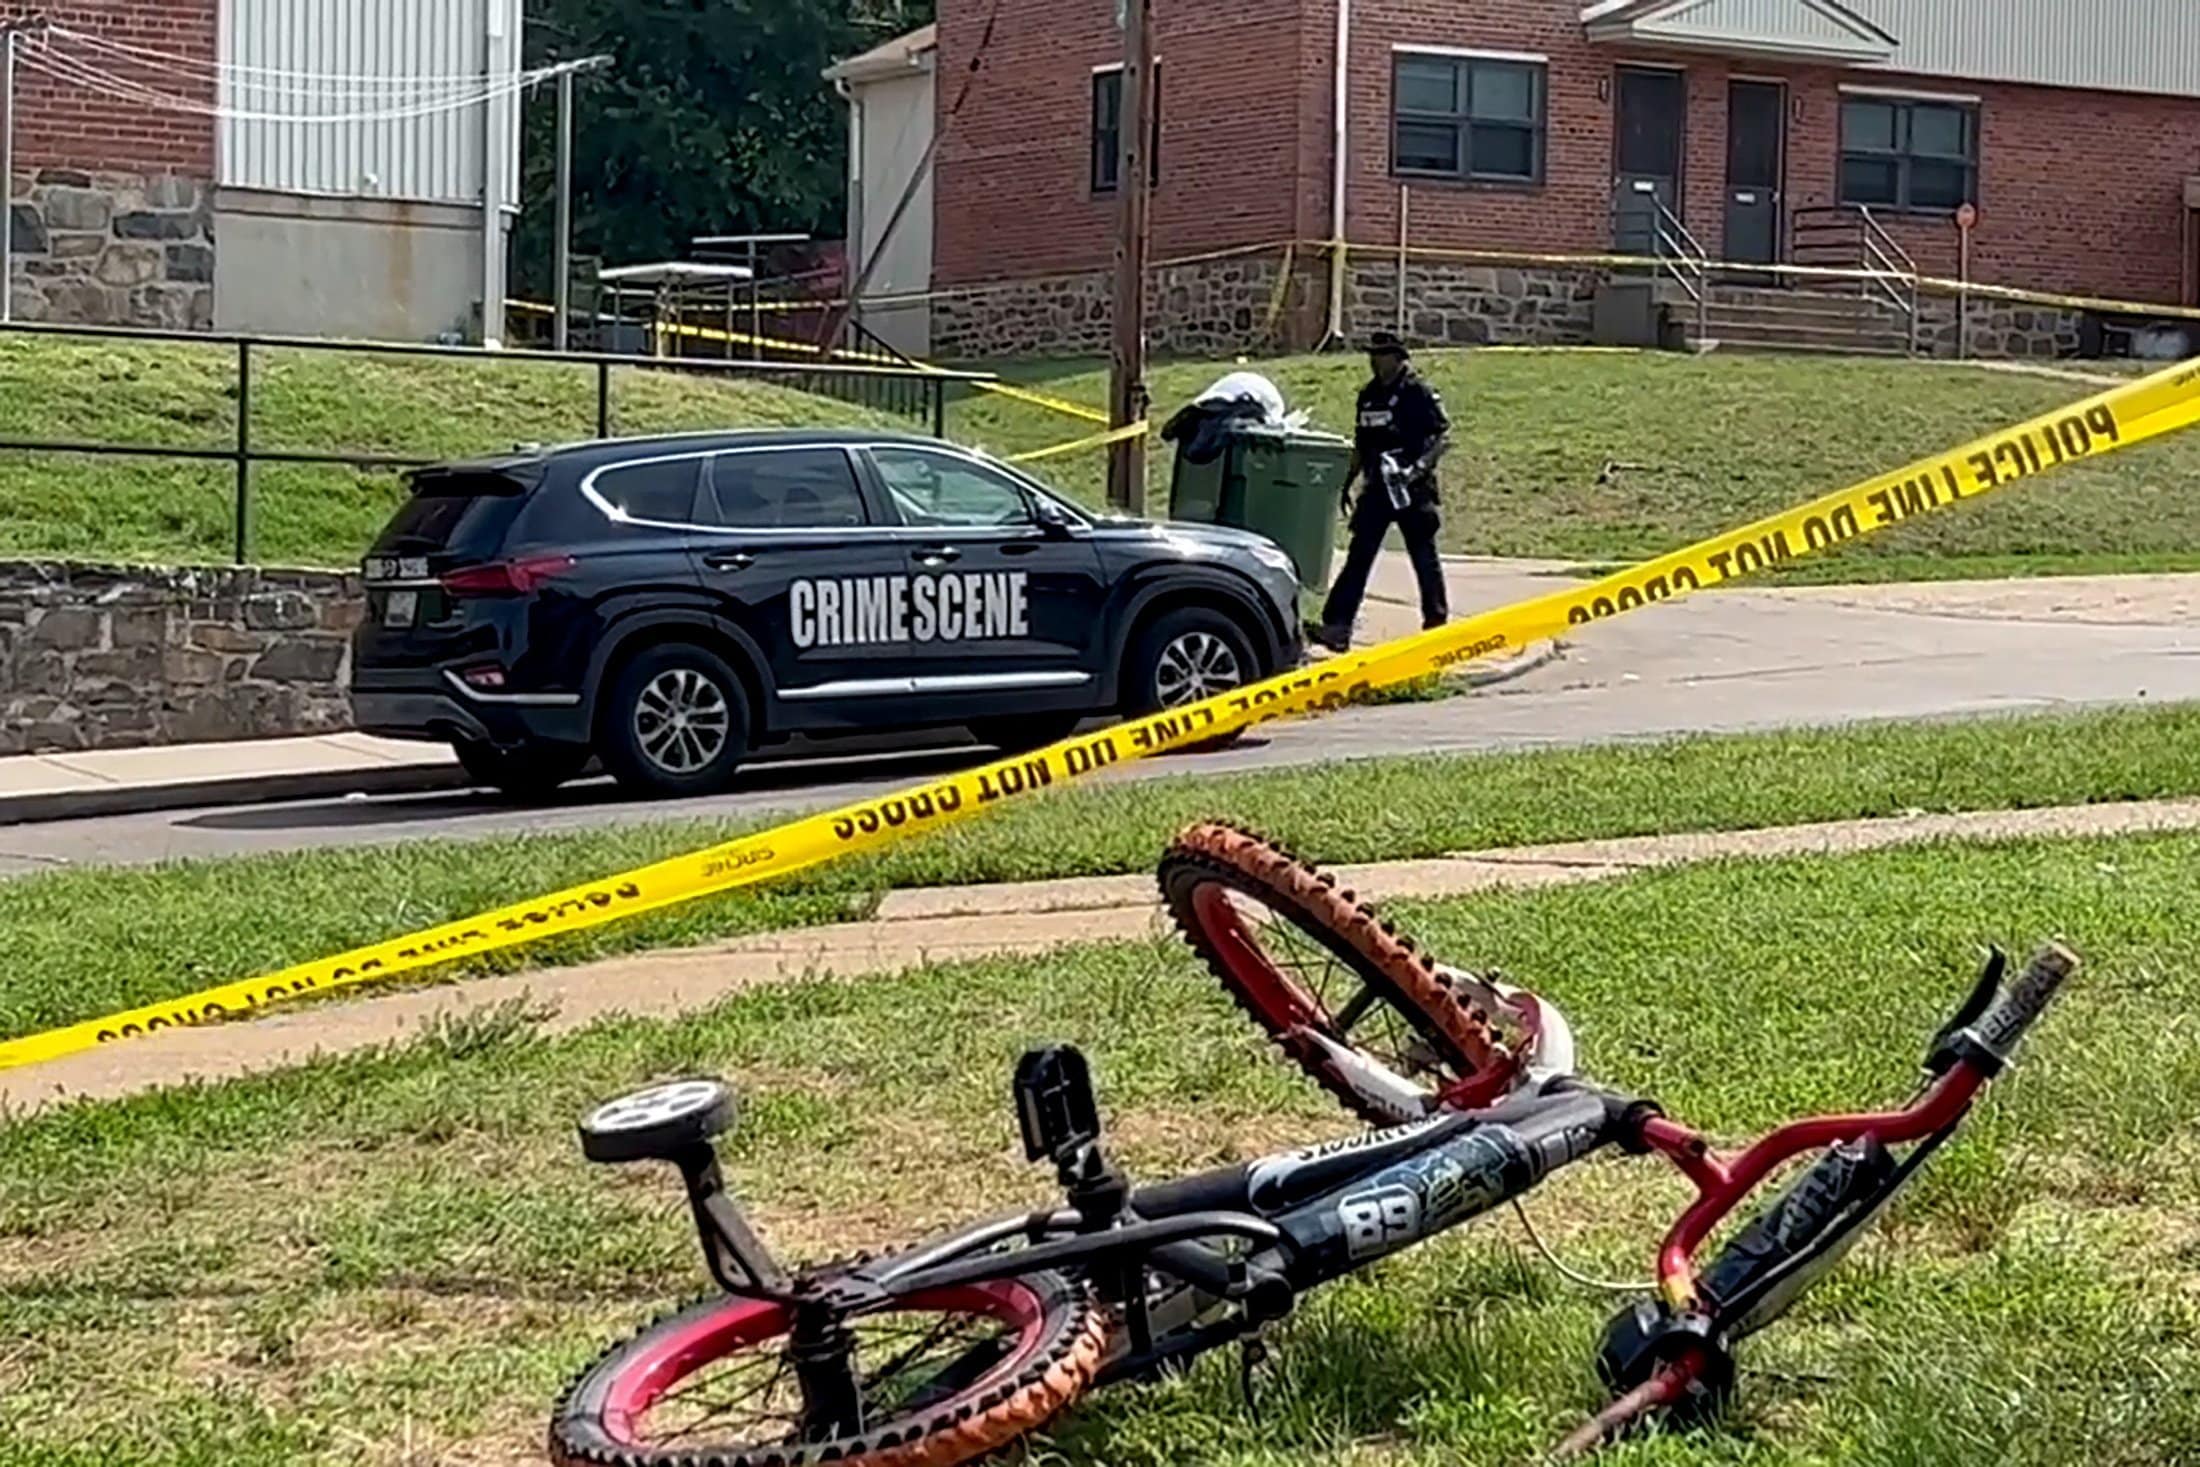 A child's bicycle, seen in a still image from video, lies on a lawn as a police office walks down a residential street in Baltimore July 2, 2023, after a mass shooting at a Fourth of July holiday weekend block party. Archbishop William E. Lori of Baltimore asked for prayers for the victims after the mass shooting left two dead and injured more than two dozen others, most of whom were teens. (OSV News photo/Reuters)